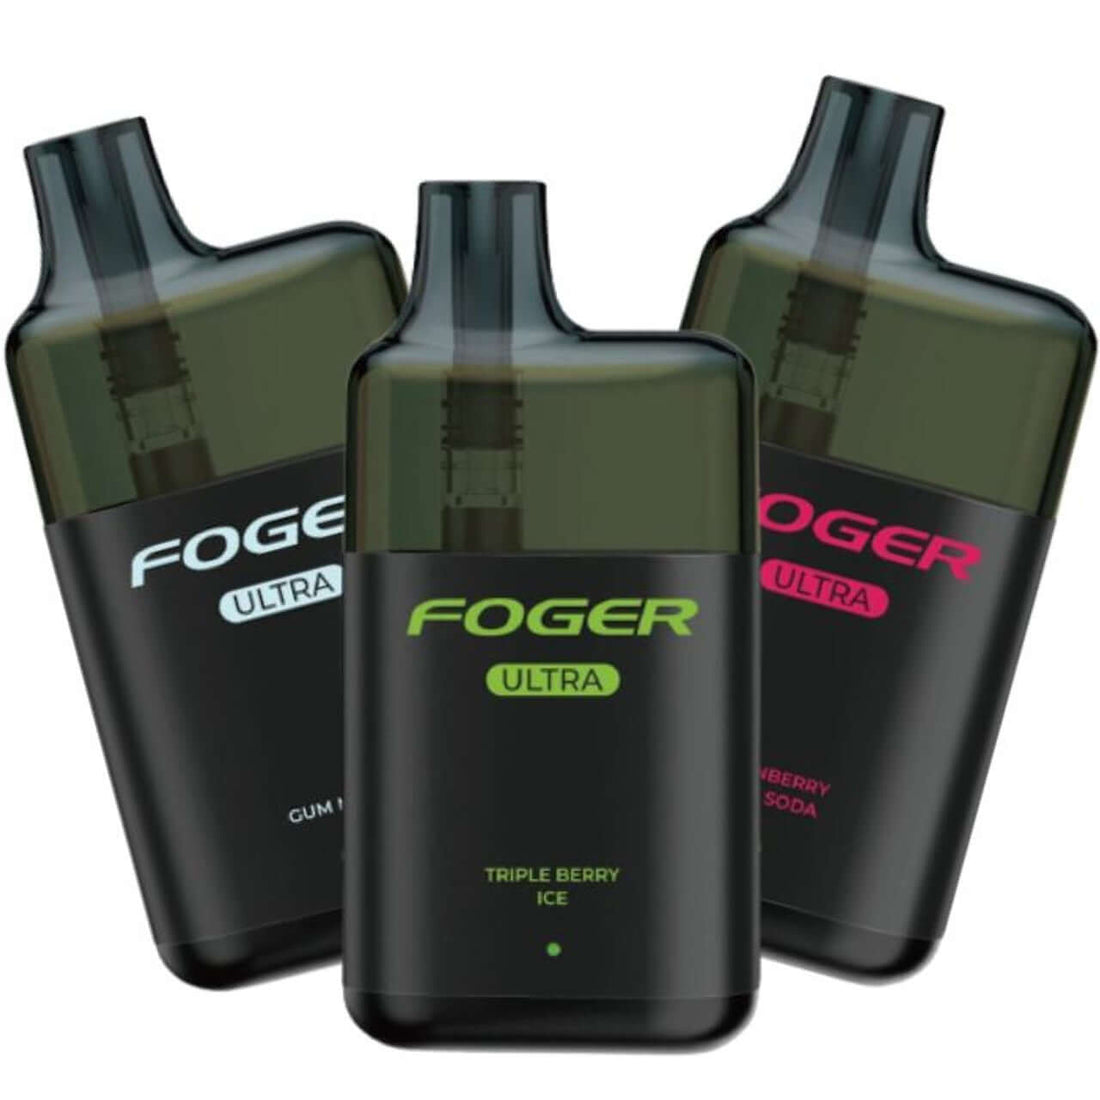 Foger Ultra 6000 disposables - In stock 